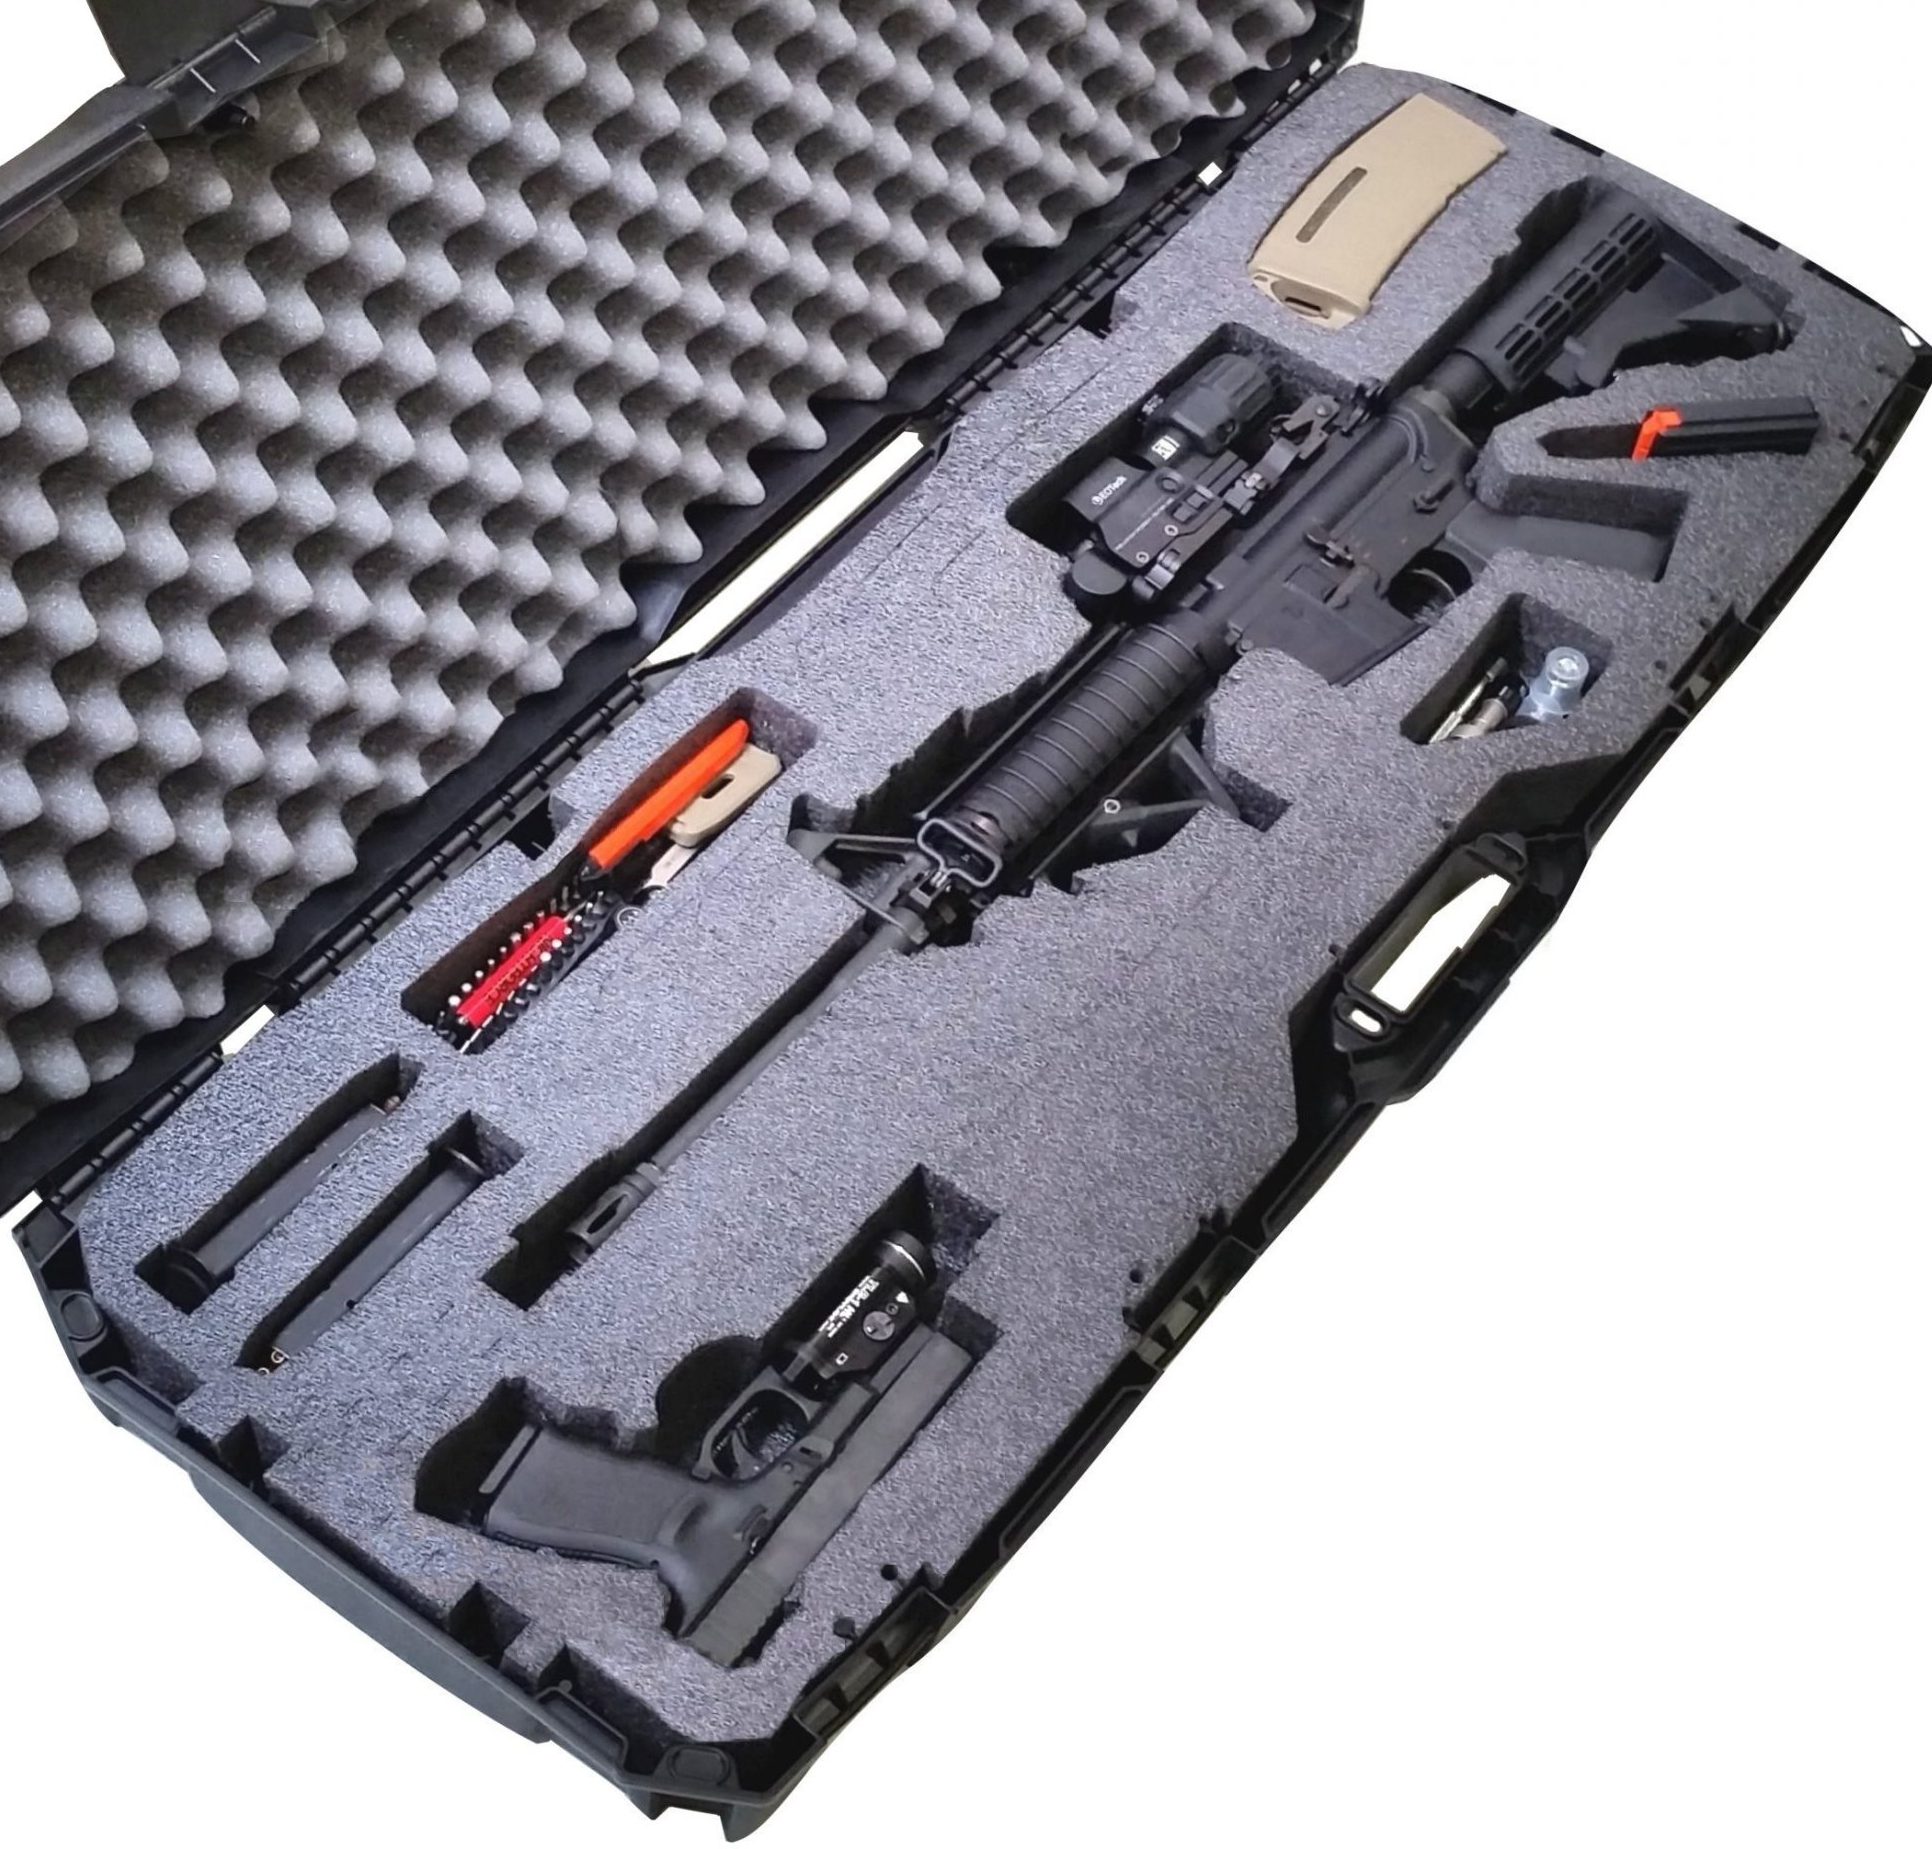 Case Club AR15 Rifle Carry Case for Rifle, Pistol & Magazines